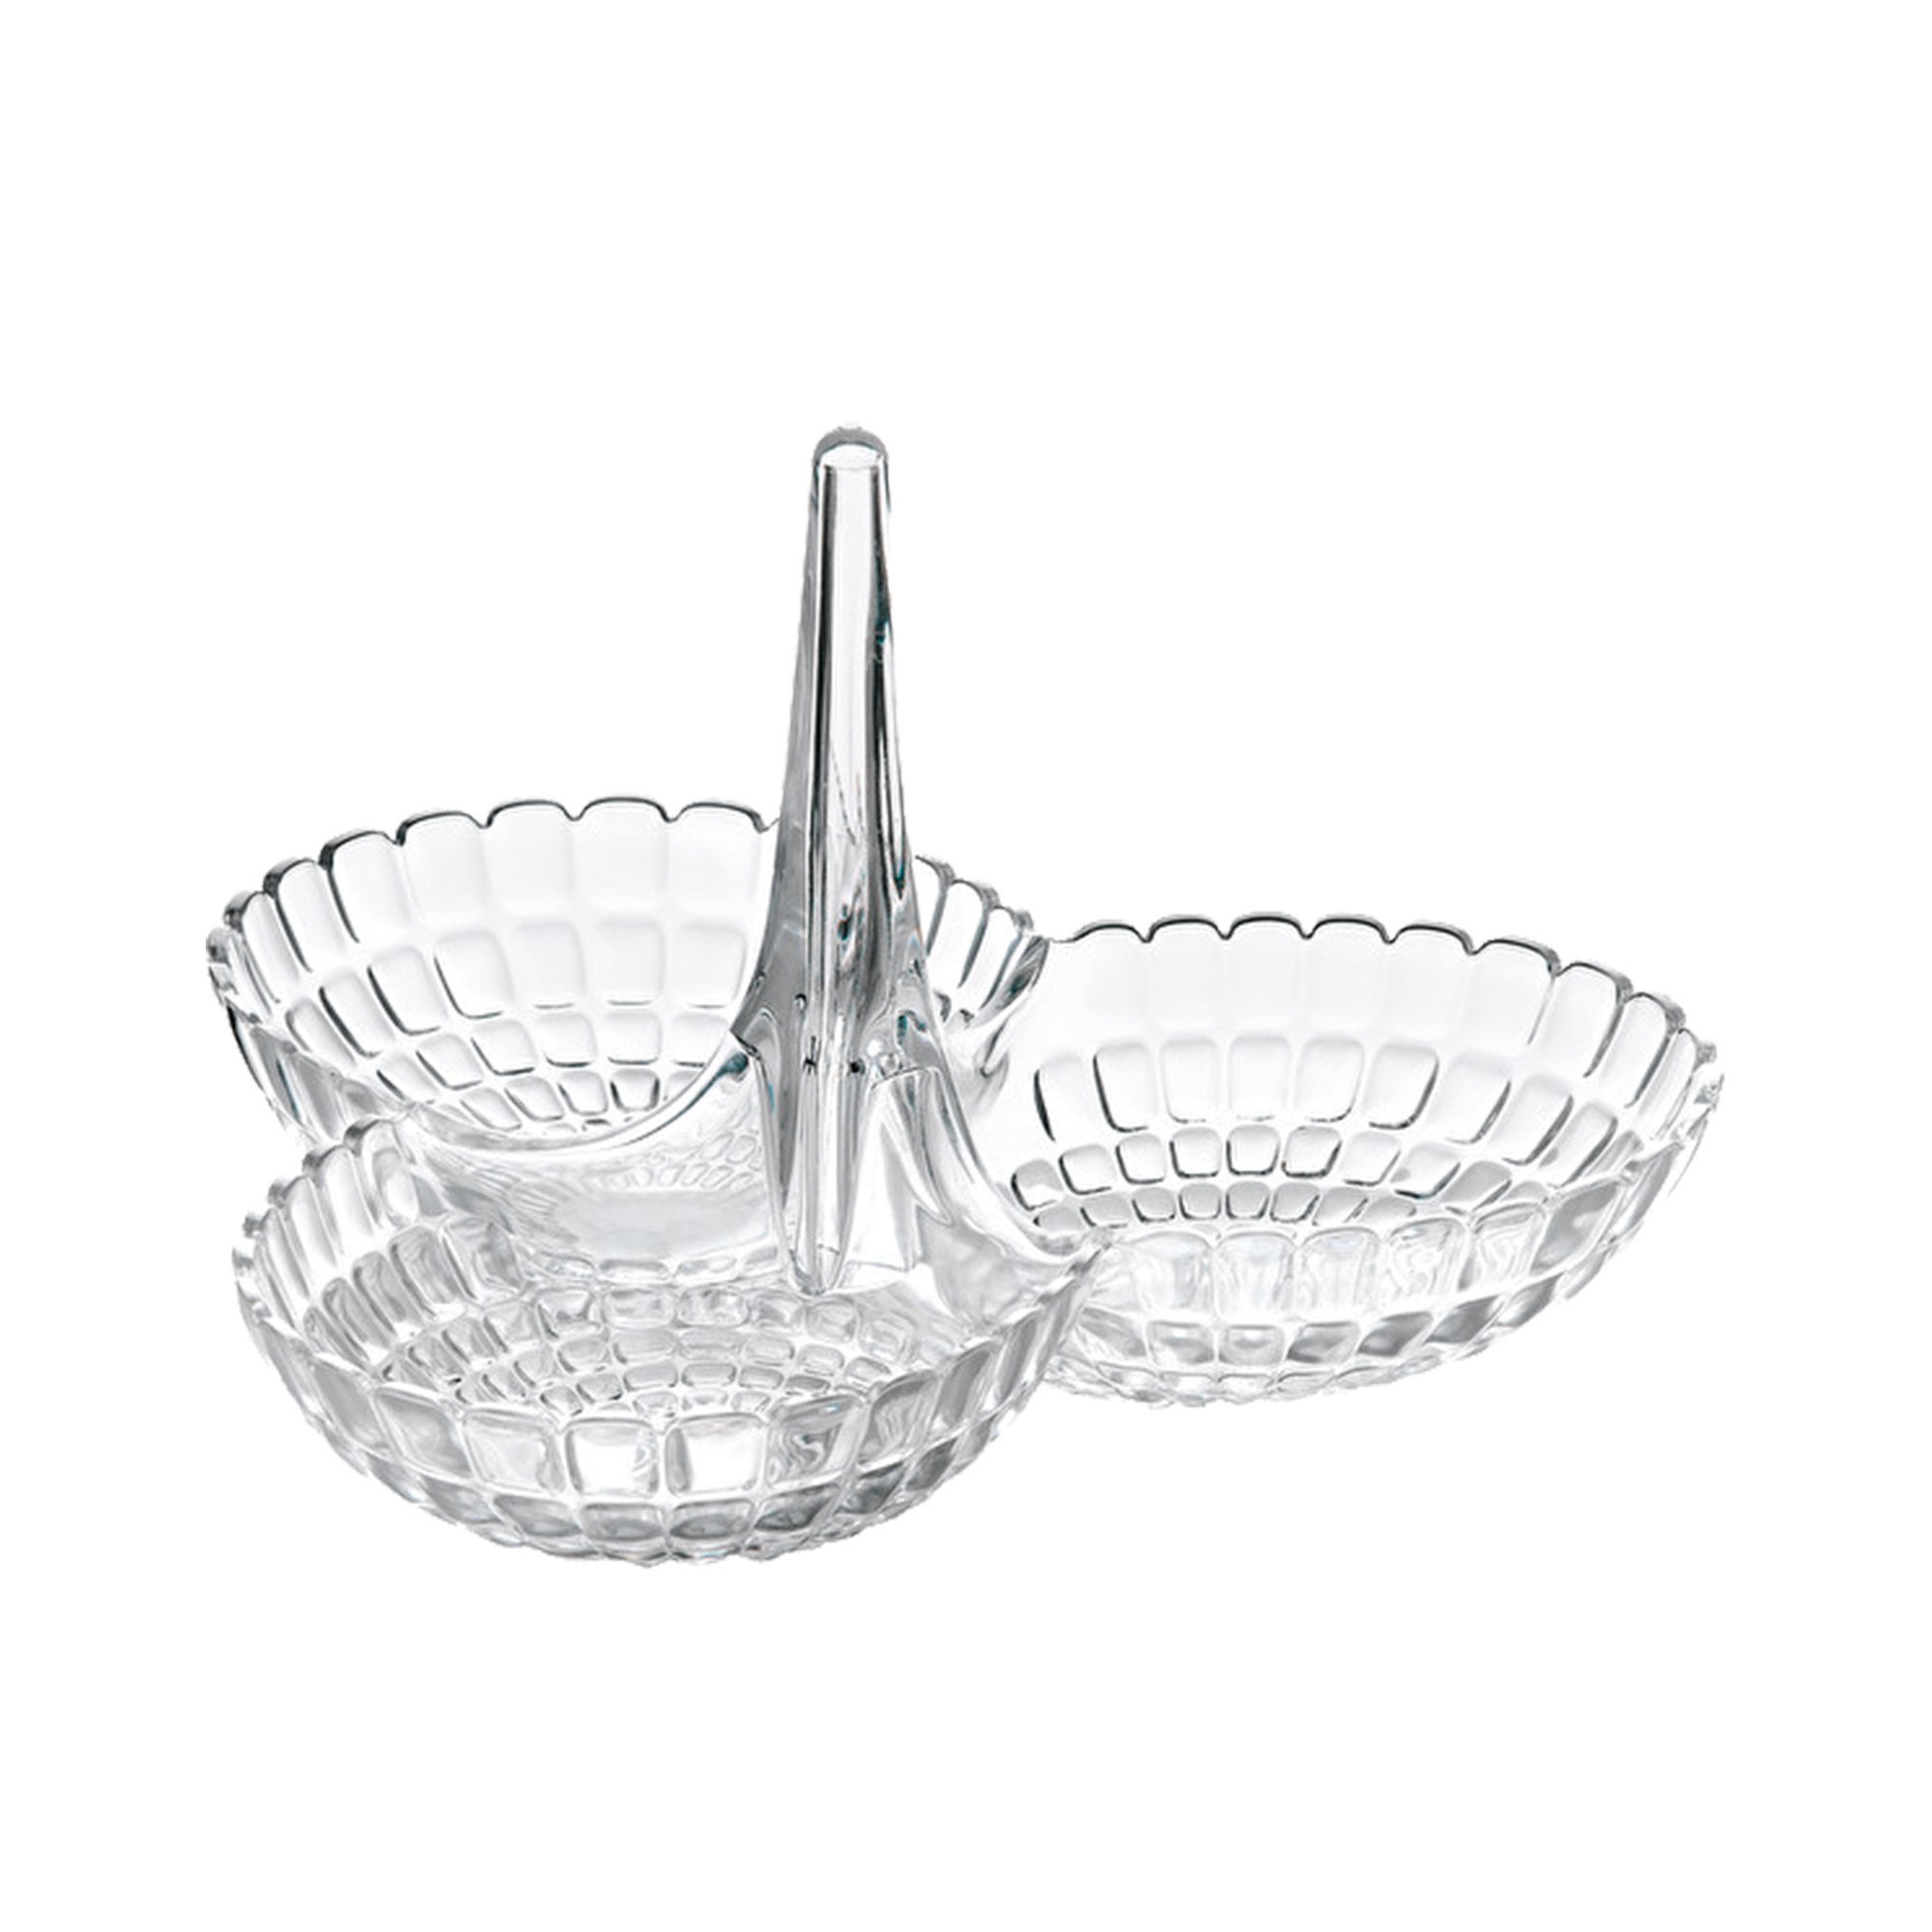 Guzzini Tiffany Hors D'oeuvres Serving Dish Clear Image 1